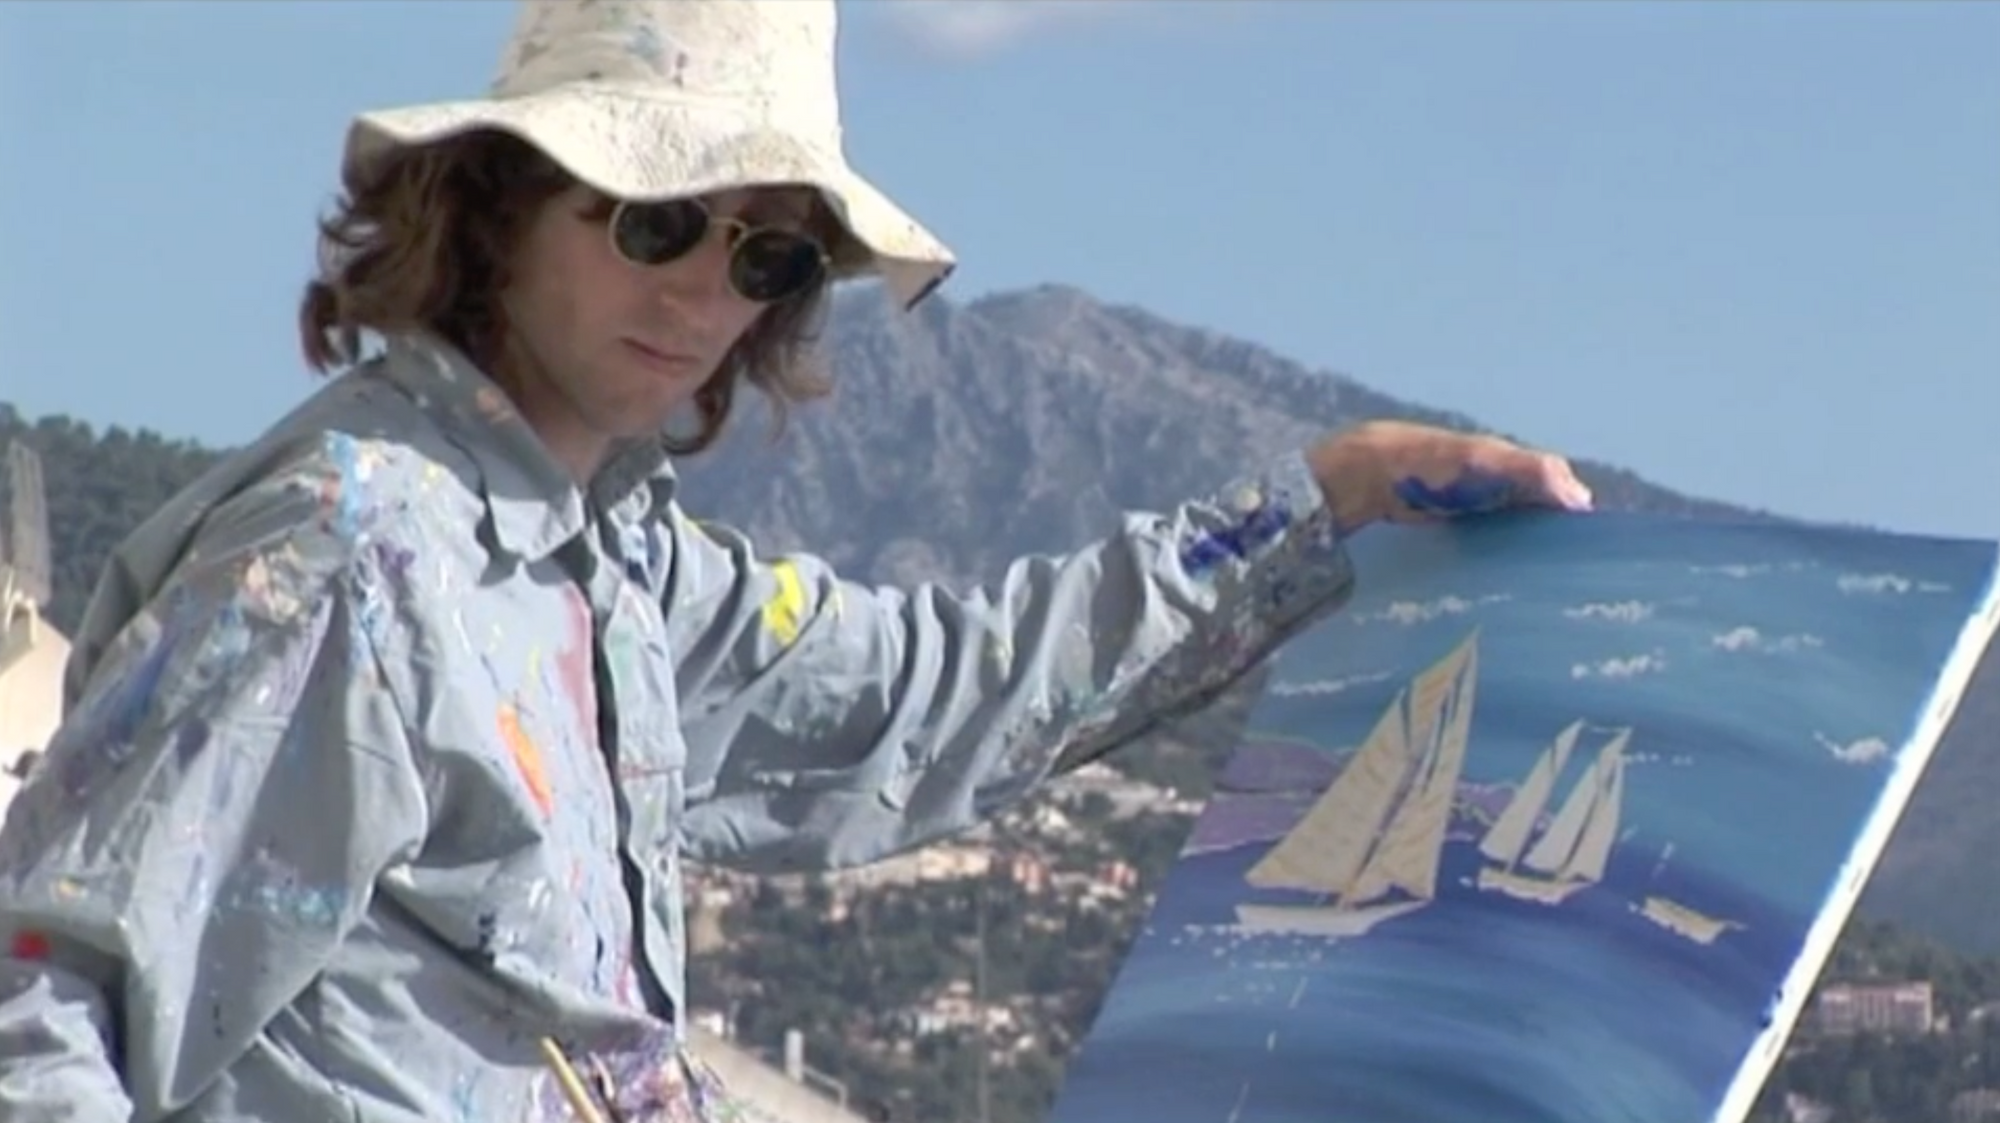 Artist John Dyer painting in Monaco for the official Visit Monaco promotional video in 2010